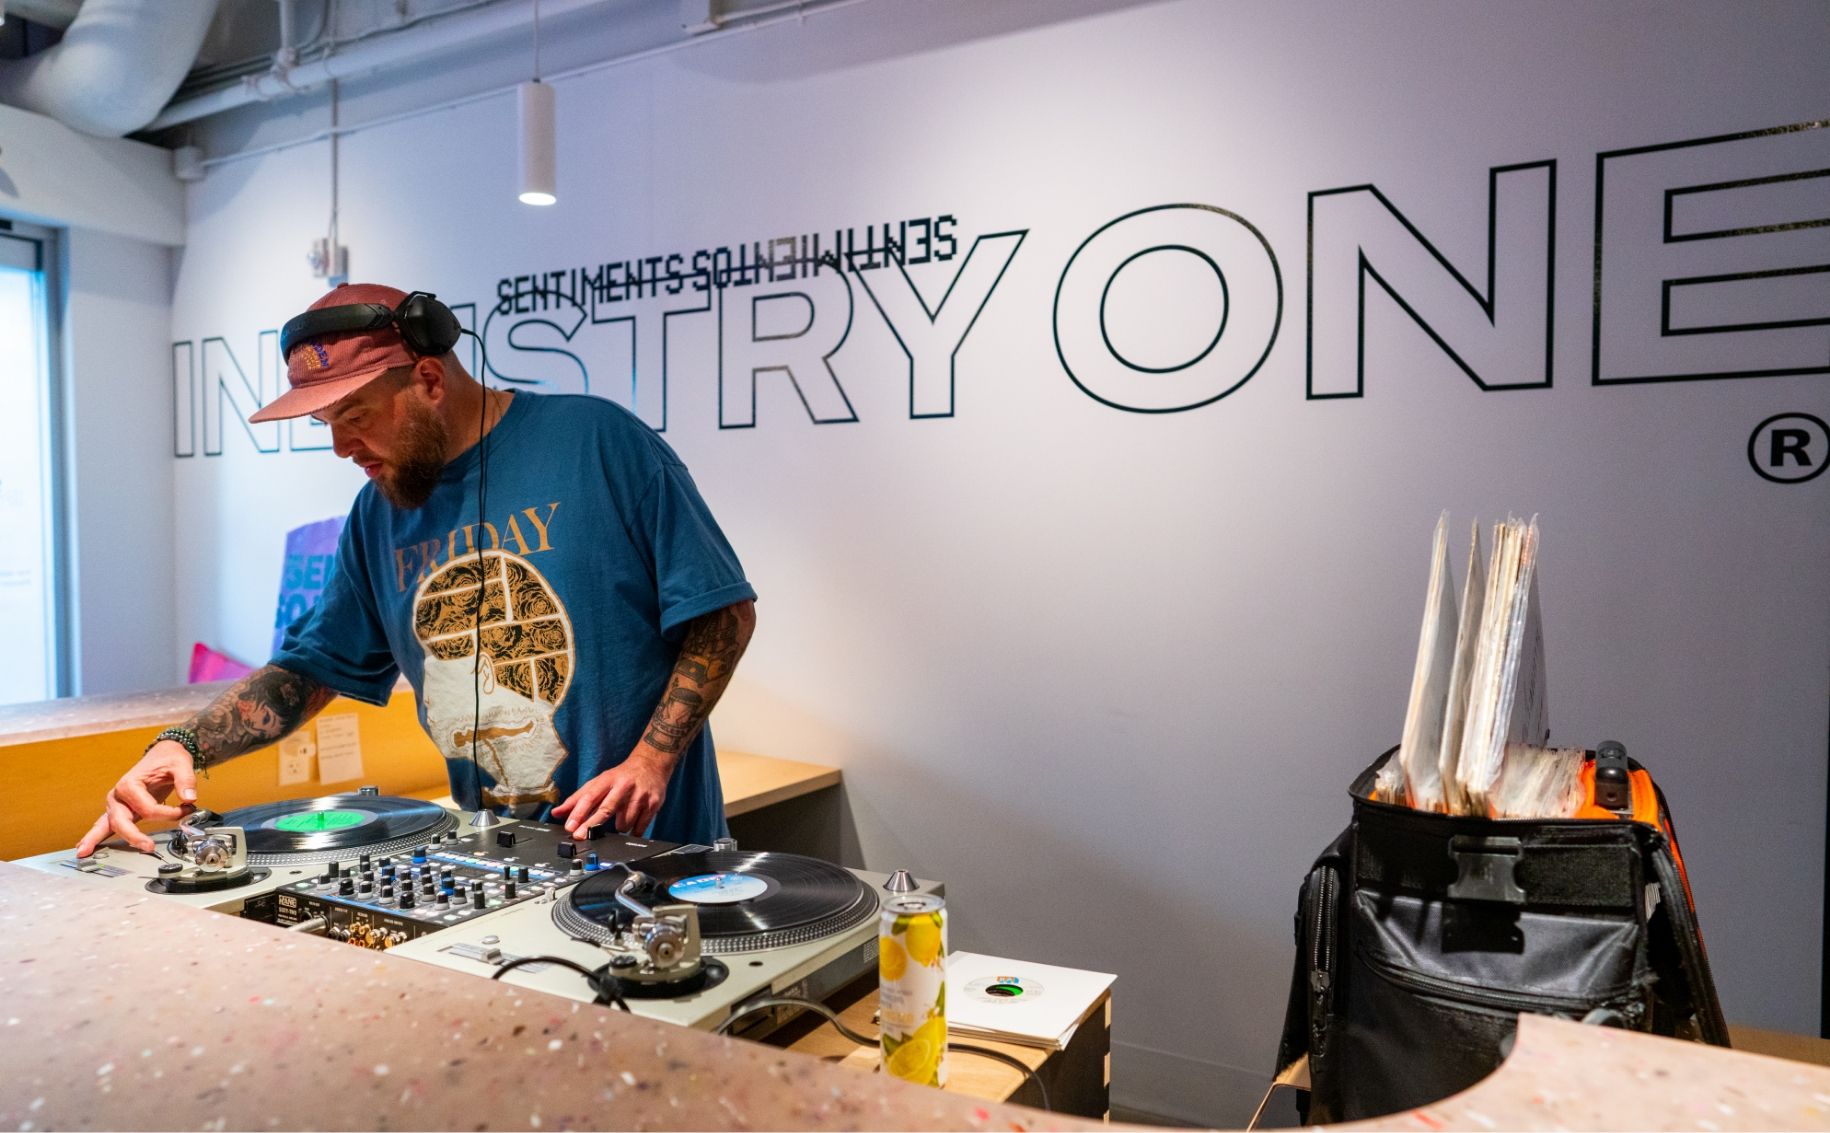 DJ putting needle down on vinyl record. Vinyl stickers on wall behind reads Sentiments Sentimientos Industry One